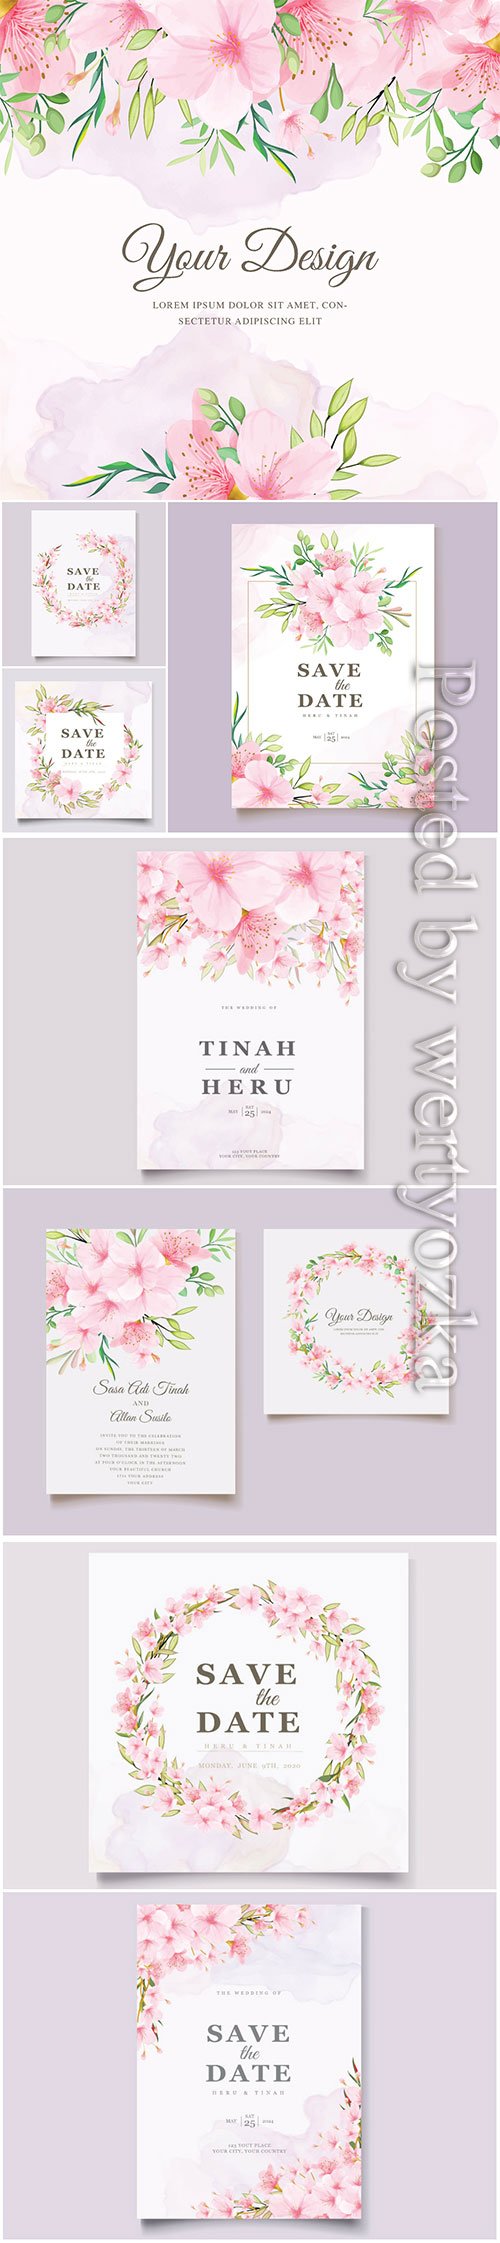 Wedding invitation cards with pink flowers in vector